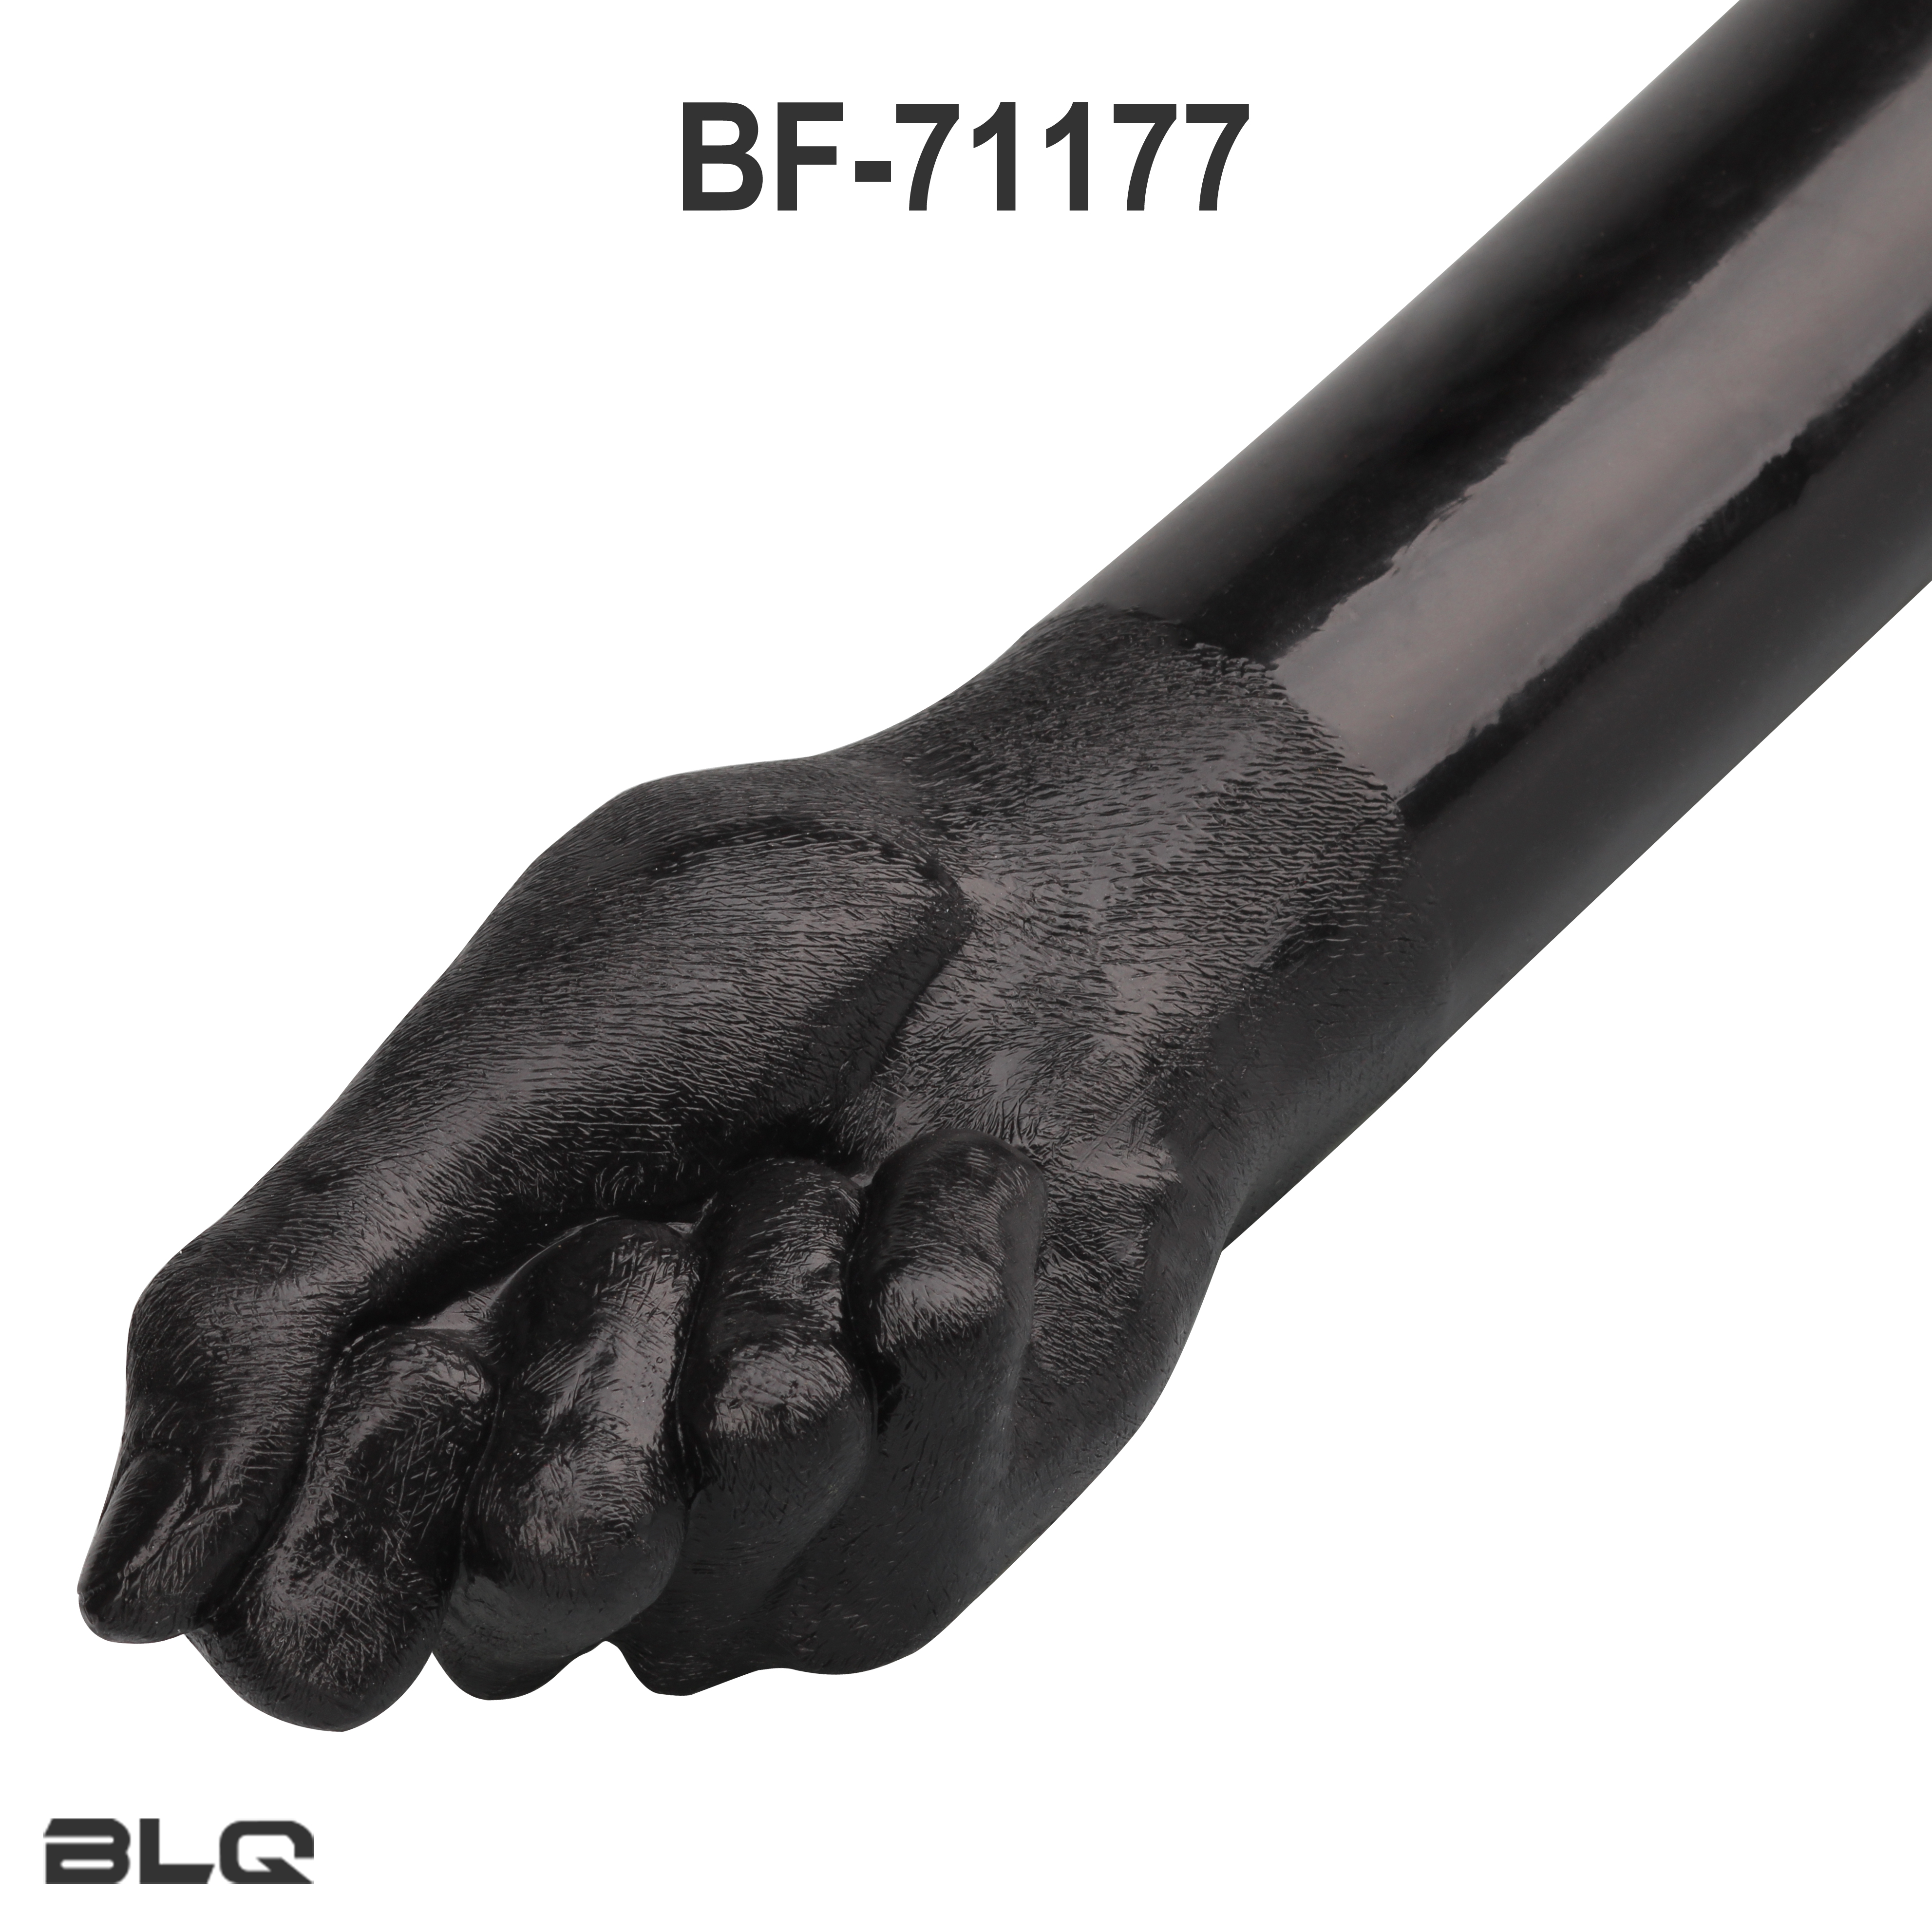 Double Ended Fisting Hands for Extreme Sex Big Black Dildo